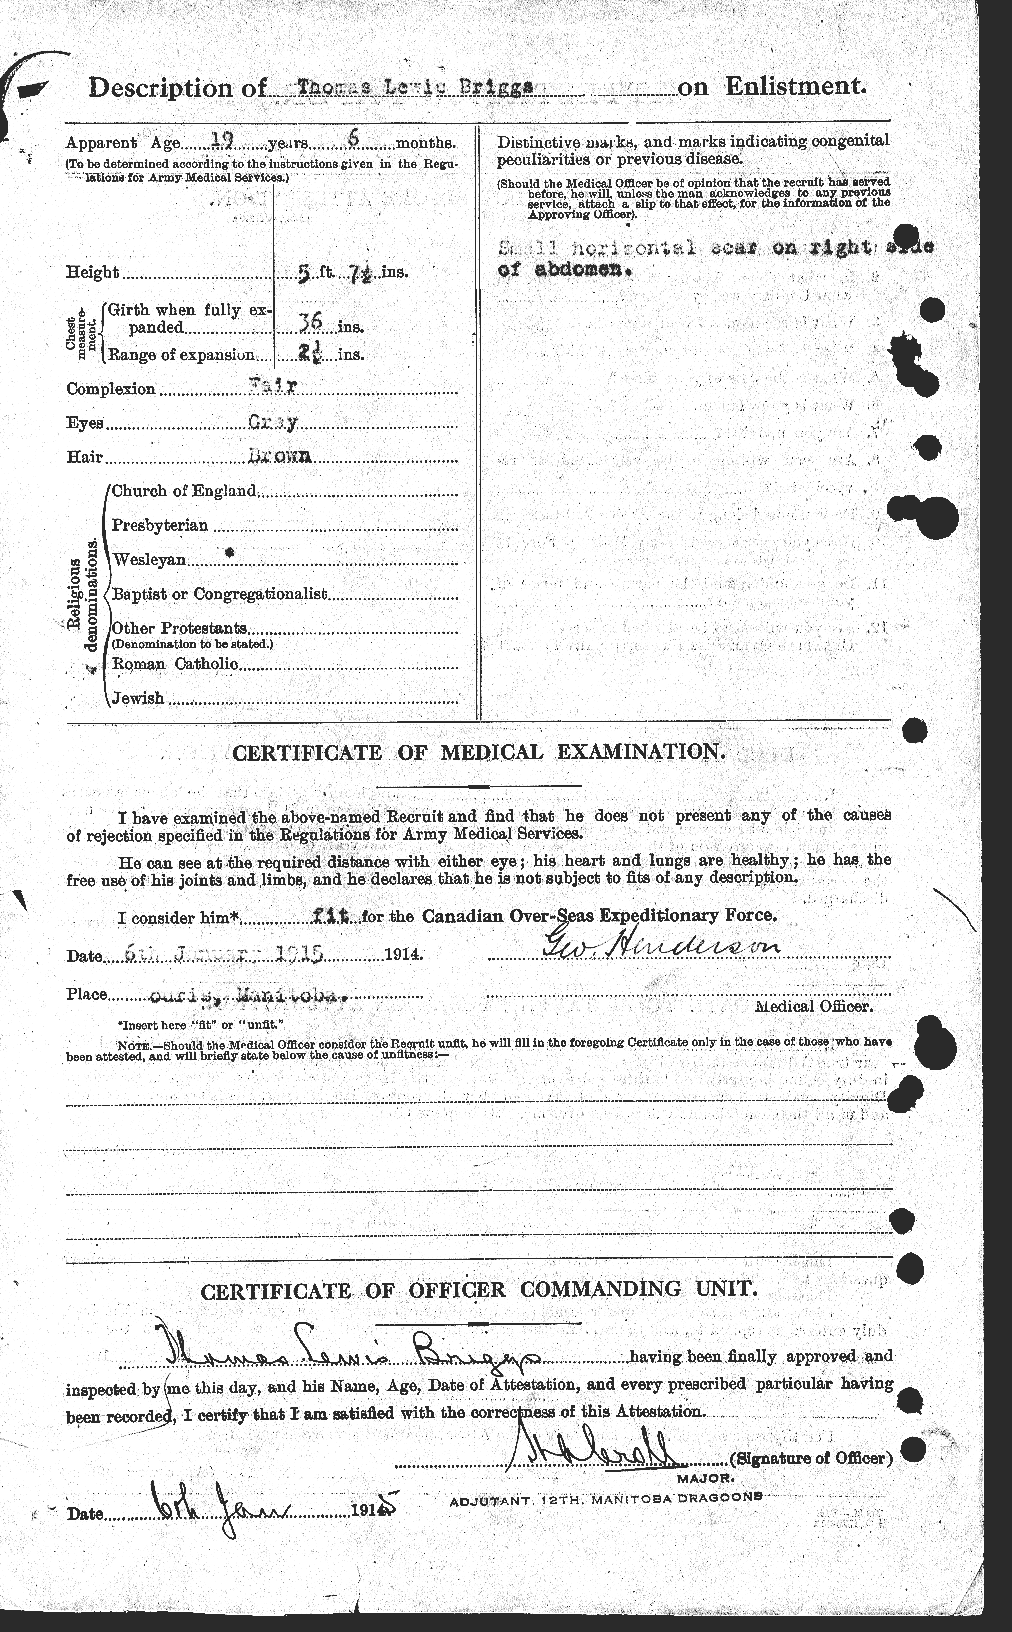 Personnel Records of the First World War - CEF 264105b